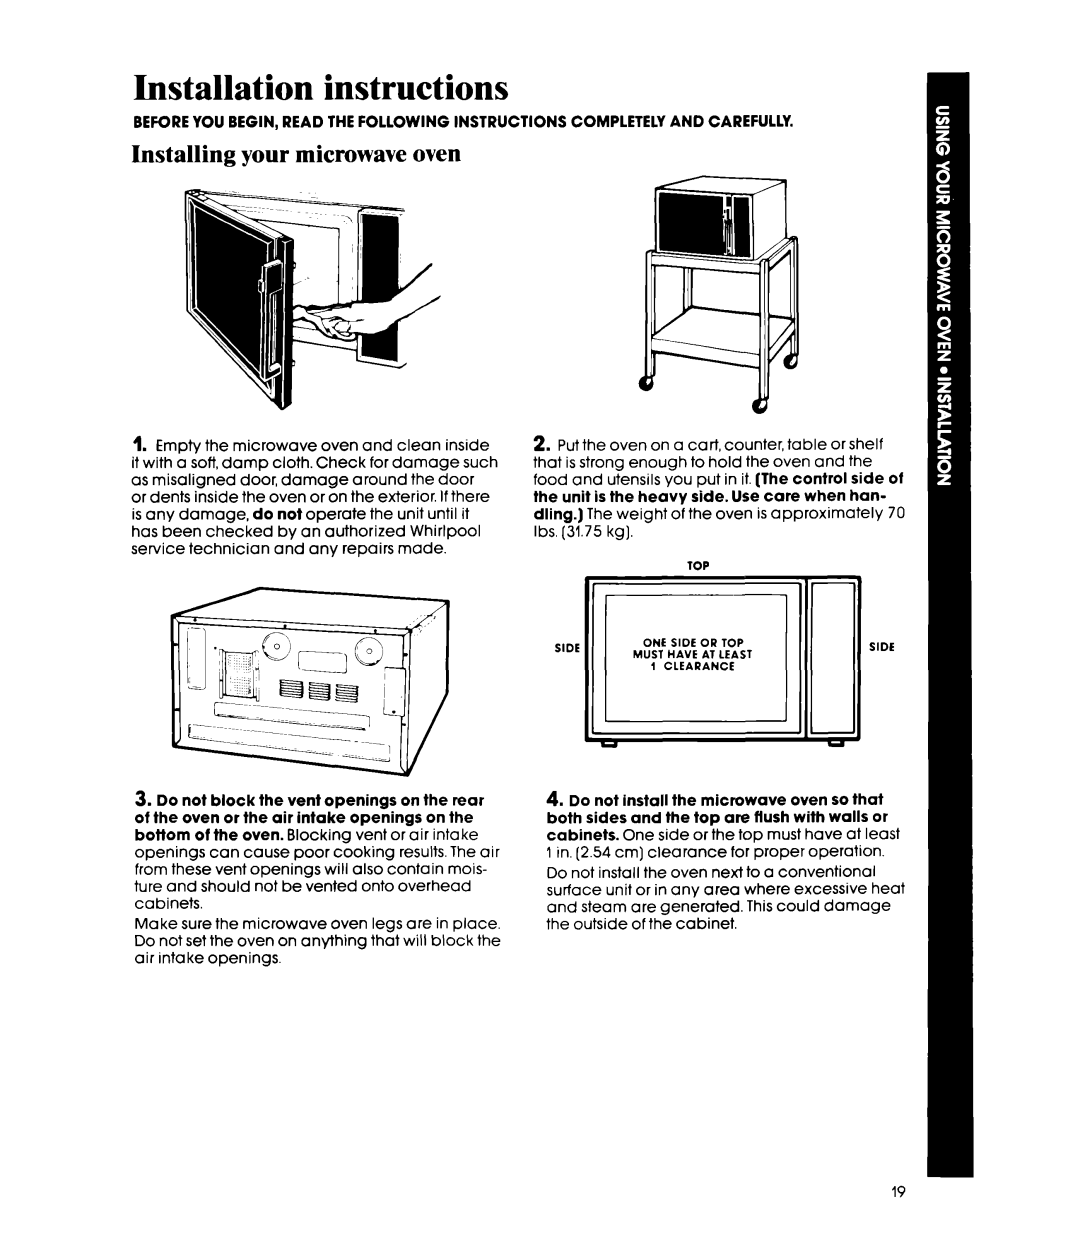 Whirlpool MW8520XP manual Installation instructions, Installing your microwave oven 